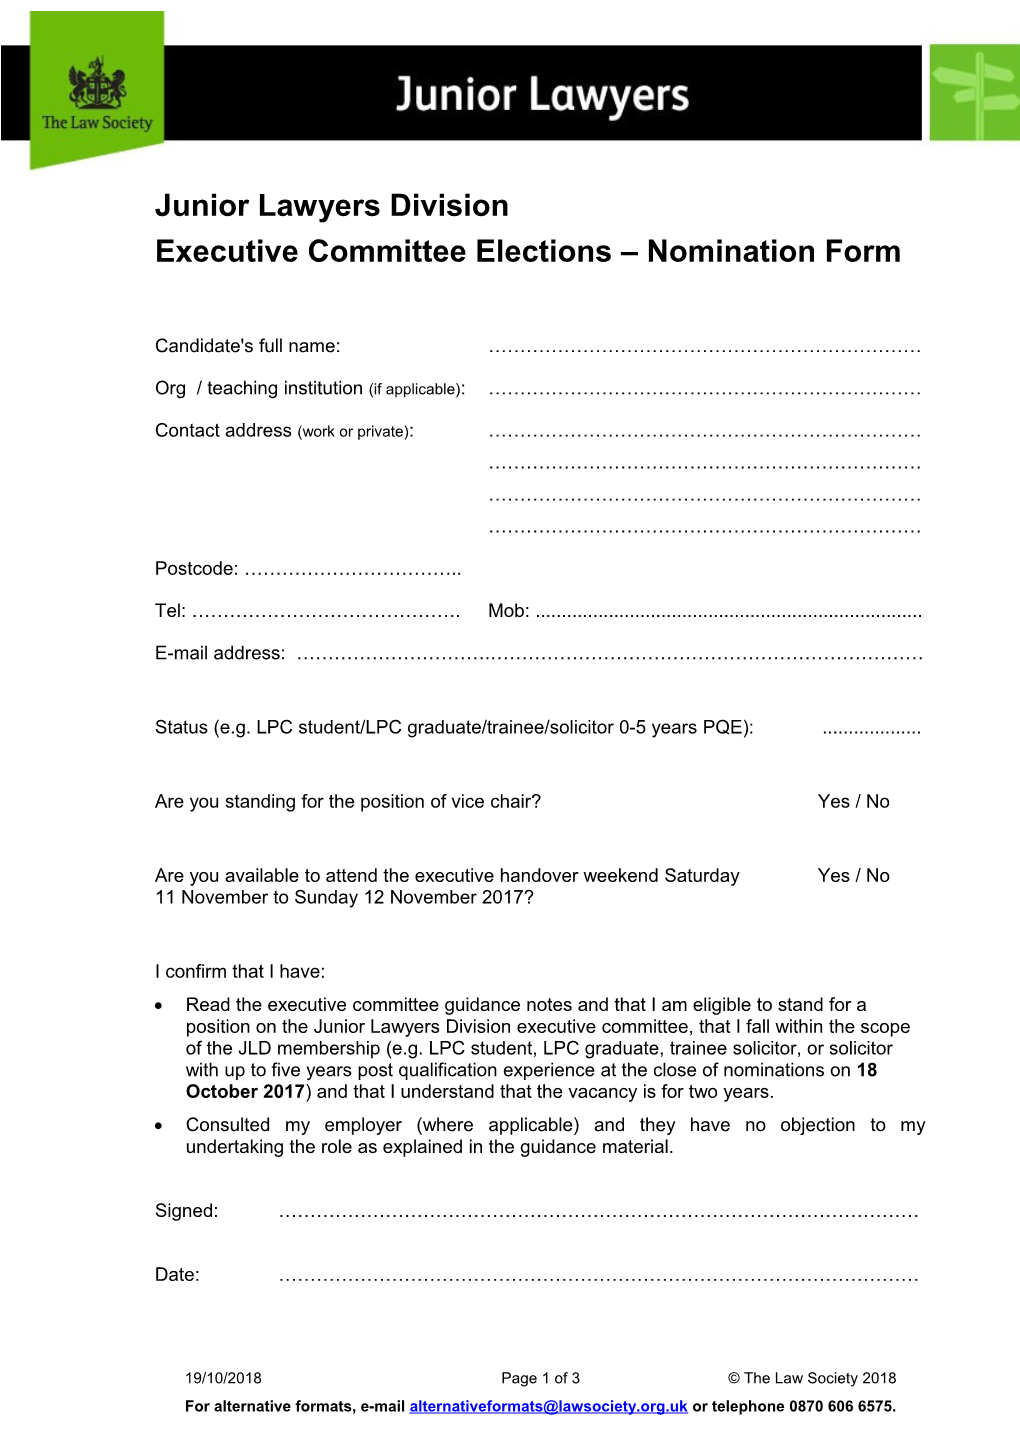 Executive Committee Elections Nomination Form